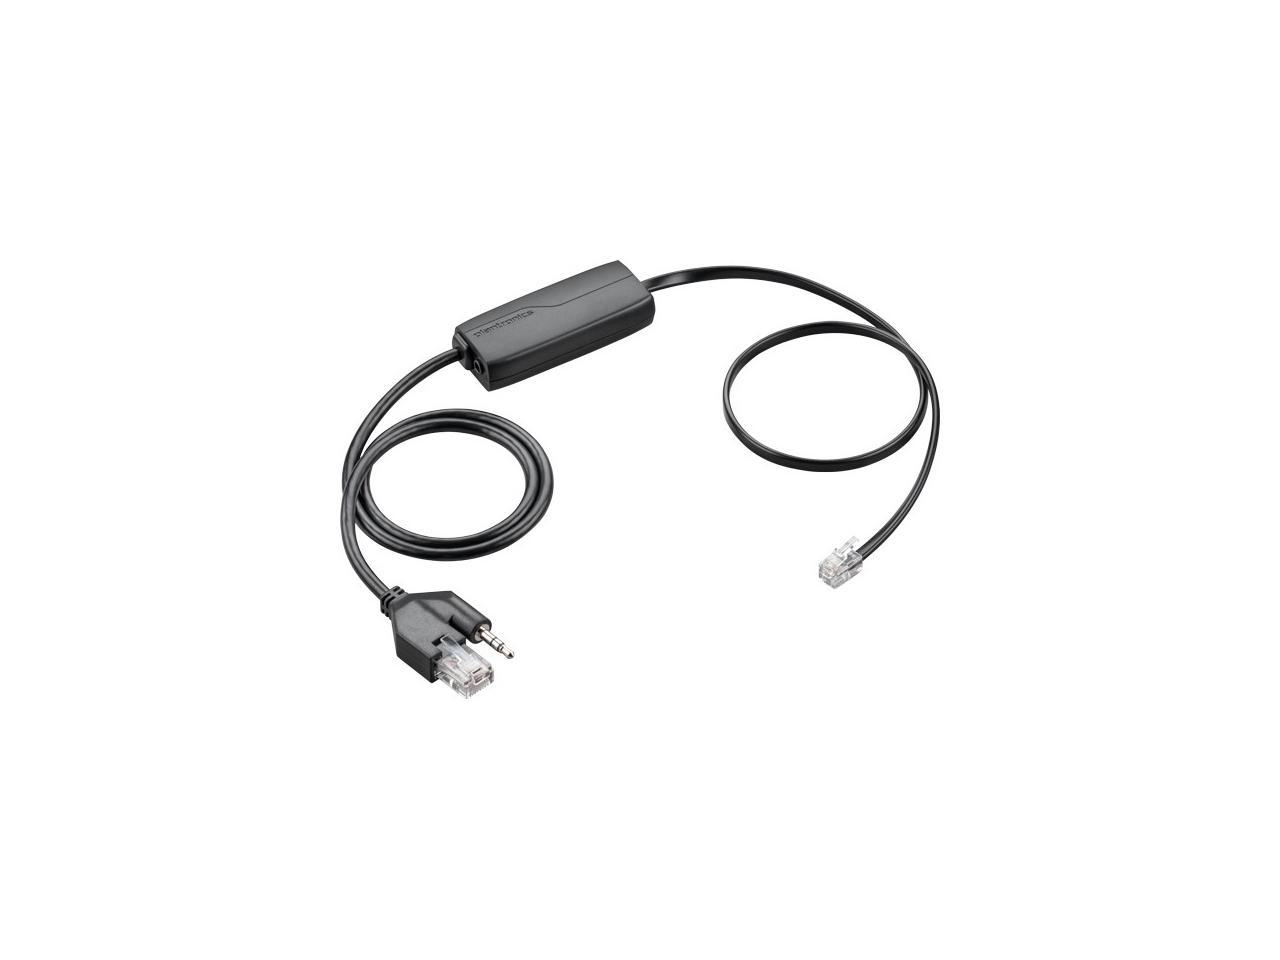 Apc-82 Electronic Hook Switch Cable